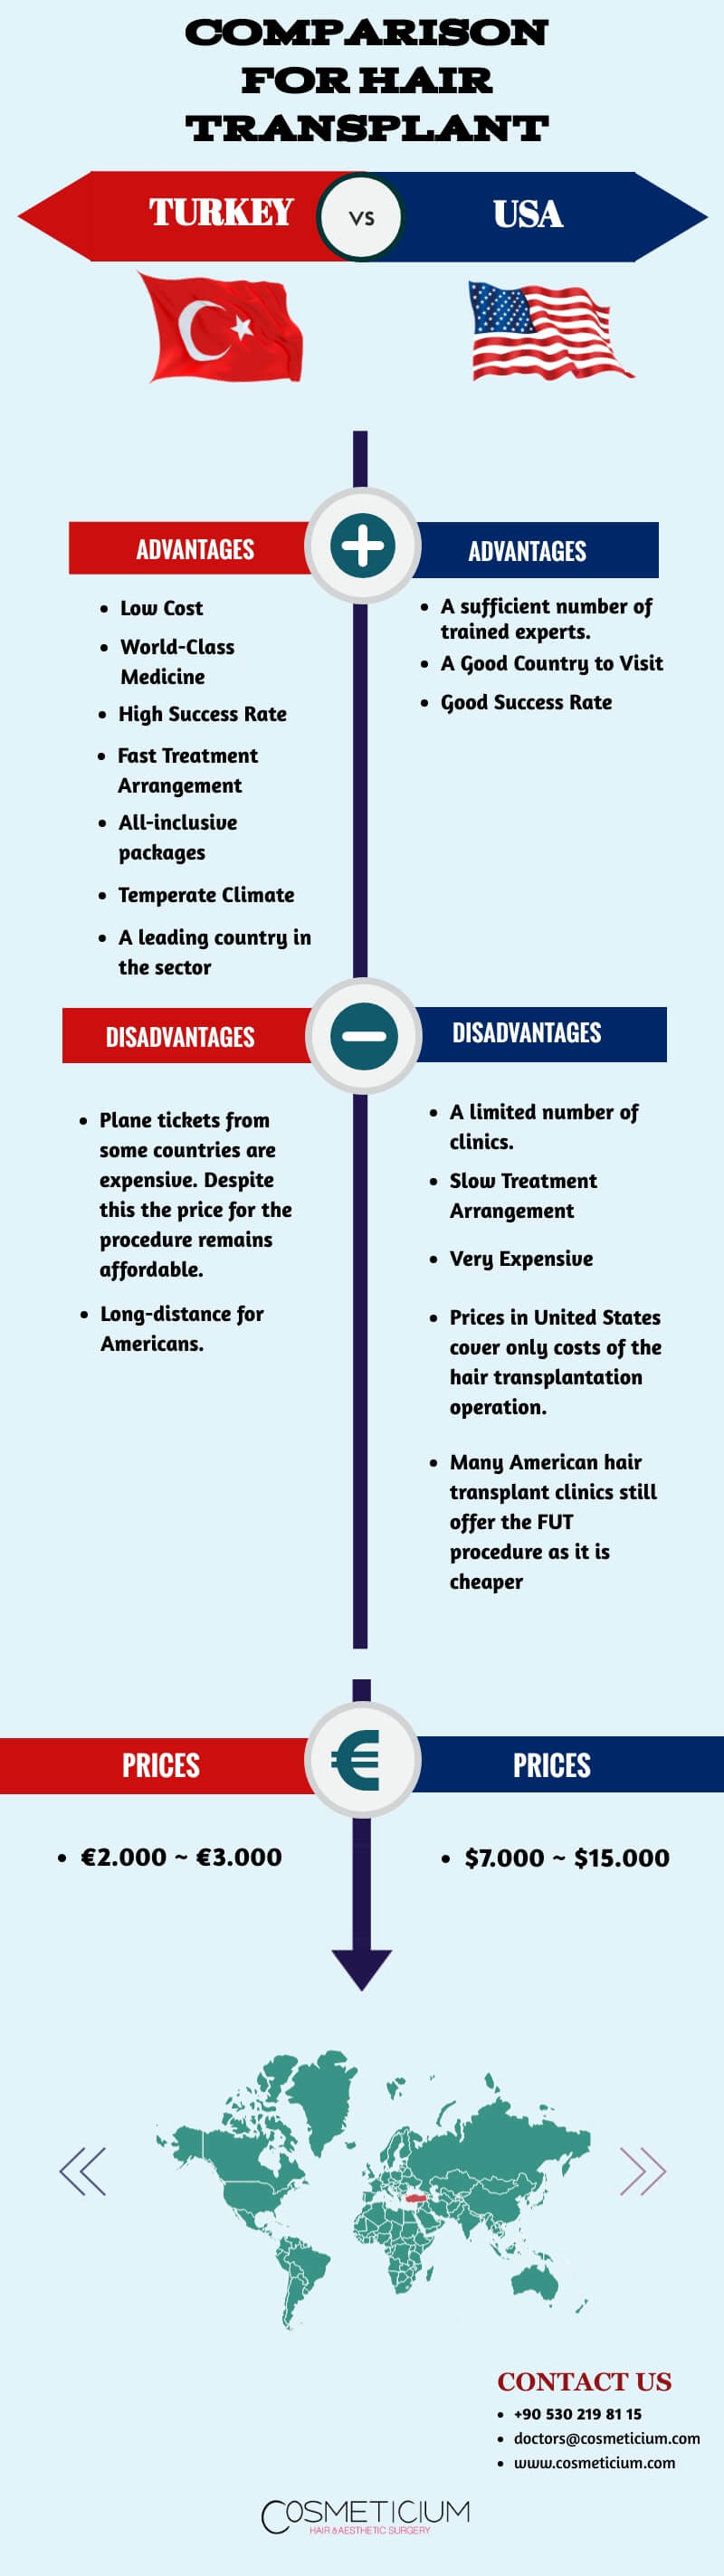 Infographic for Hair Transplant comparison Turkey and U.S.